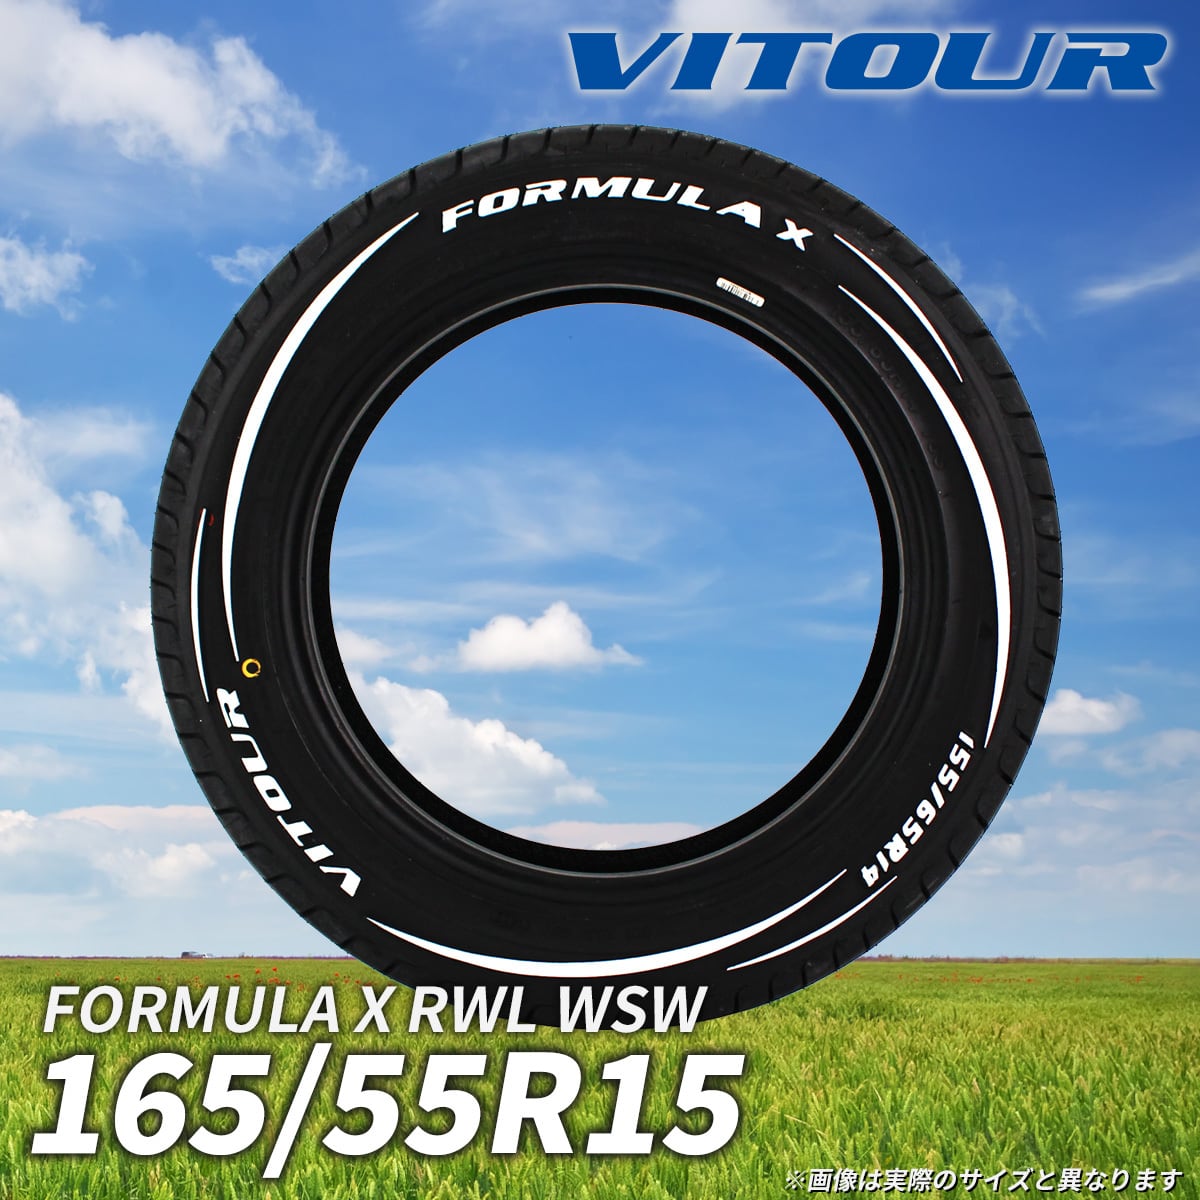 165/55R15 FORMULA X RWL-WSW【送料無料】 | VITOUR TIRE OFFICIAL